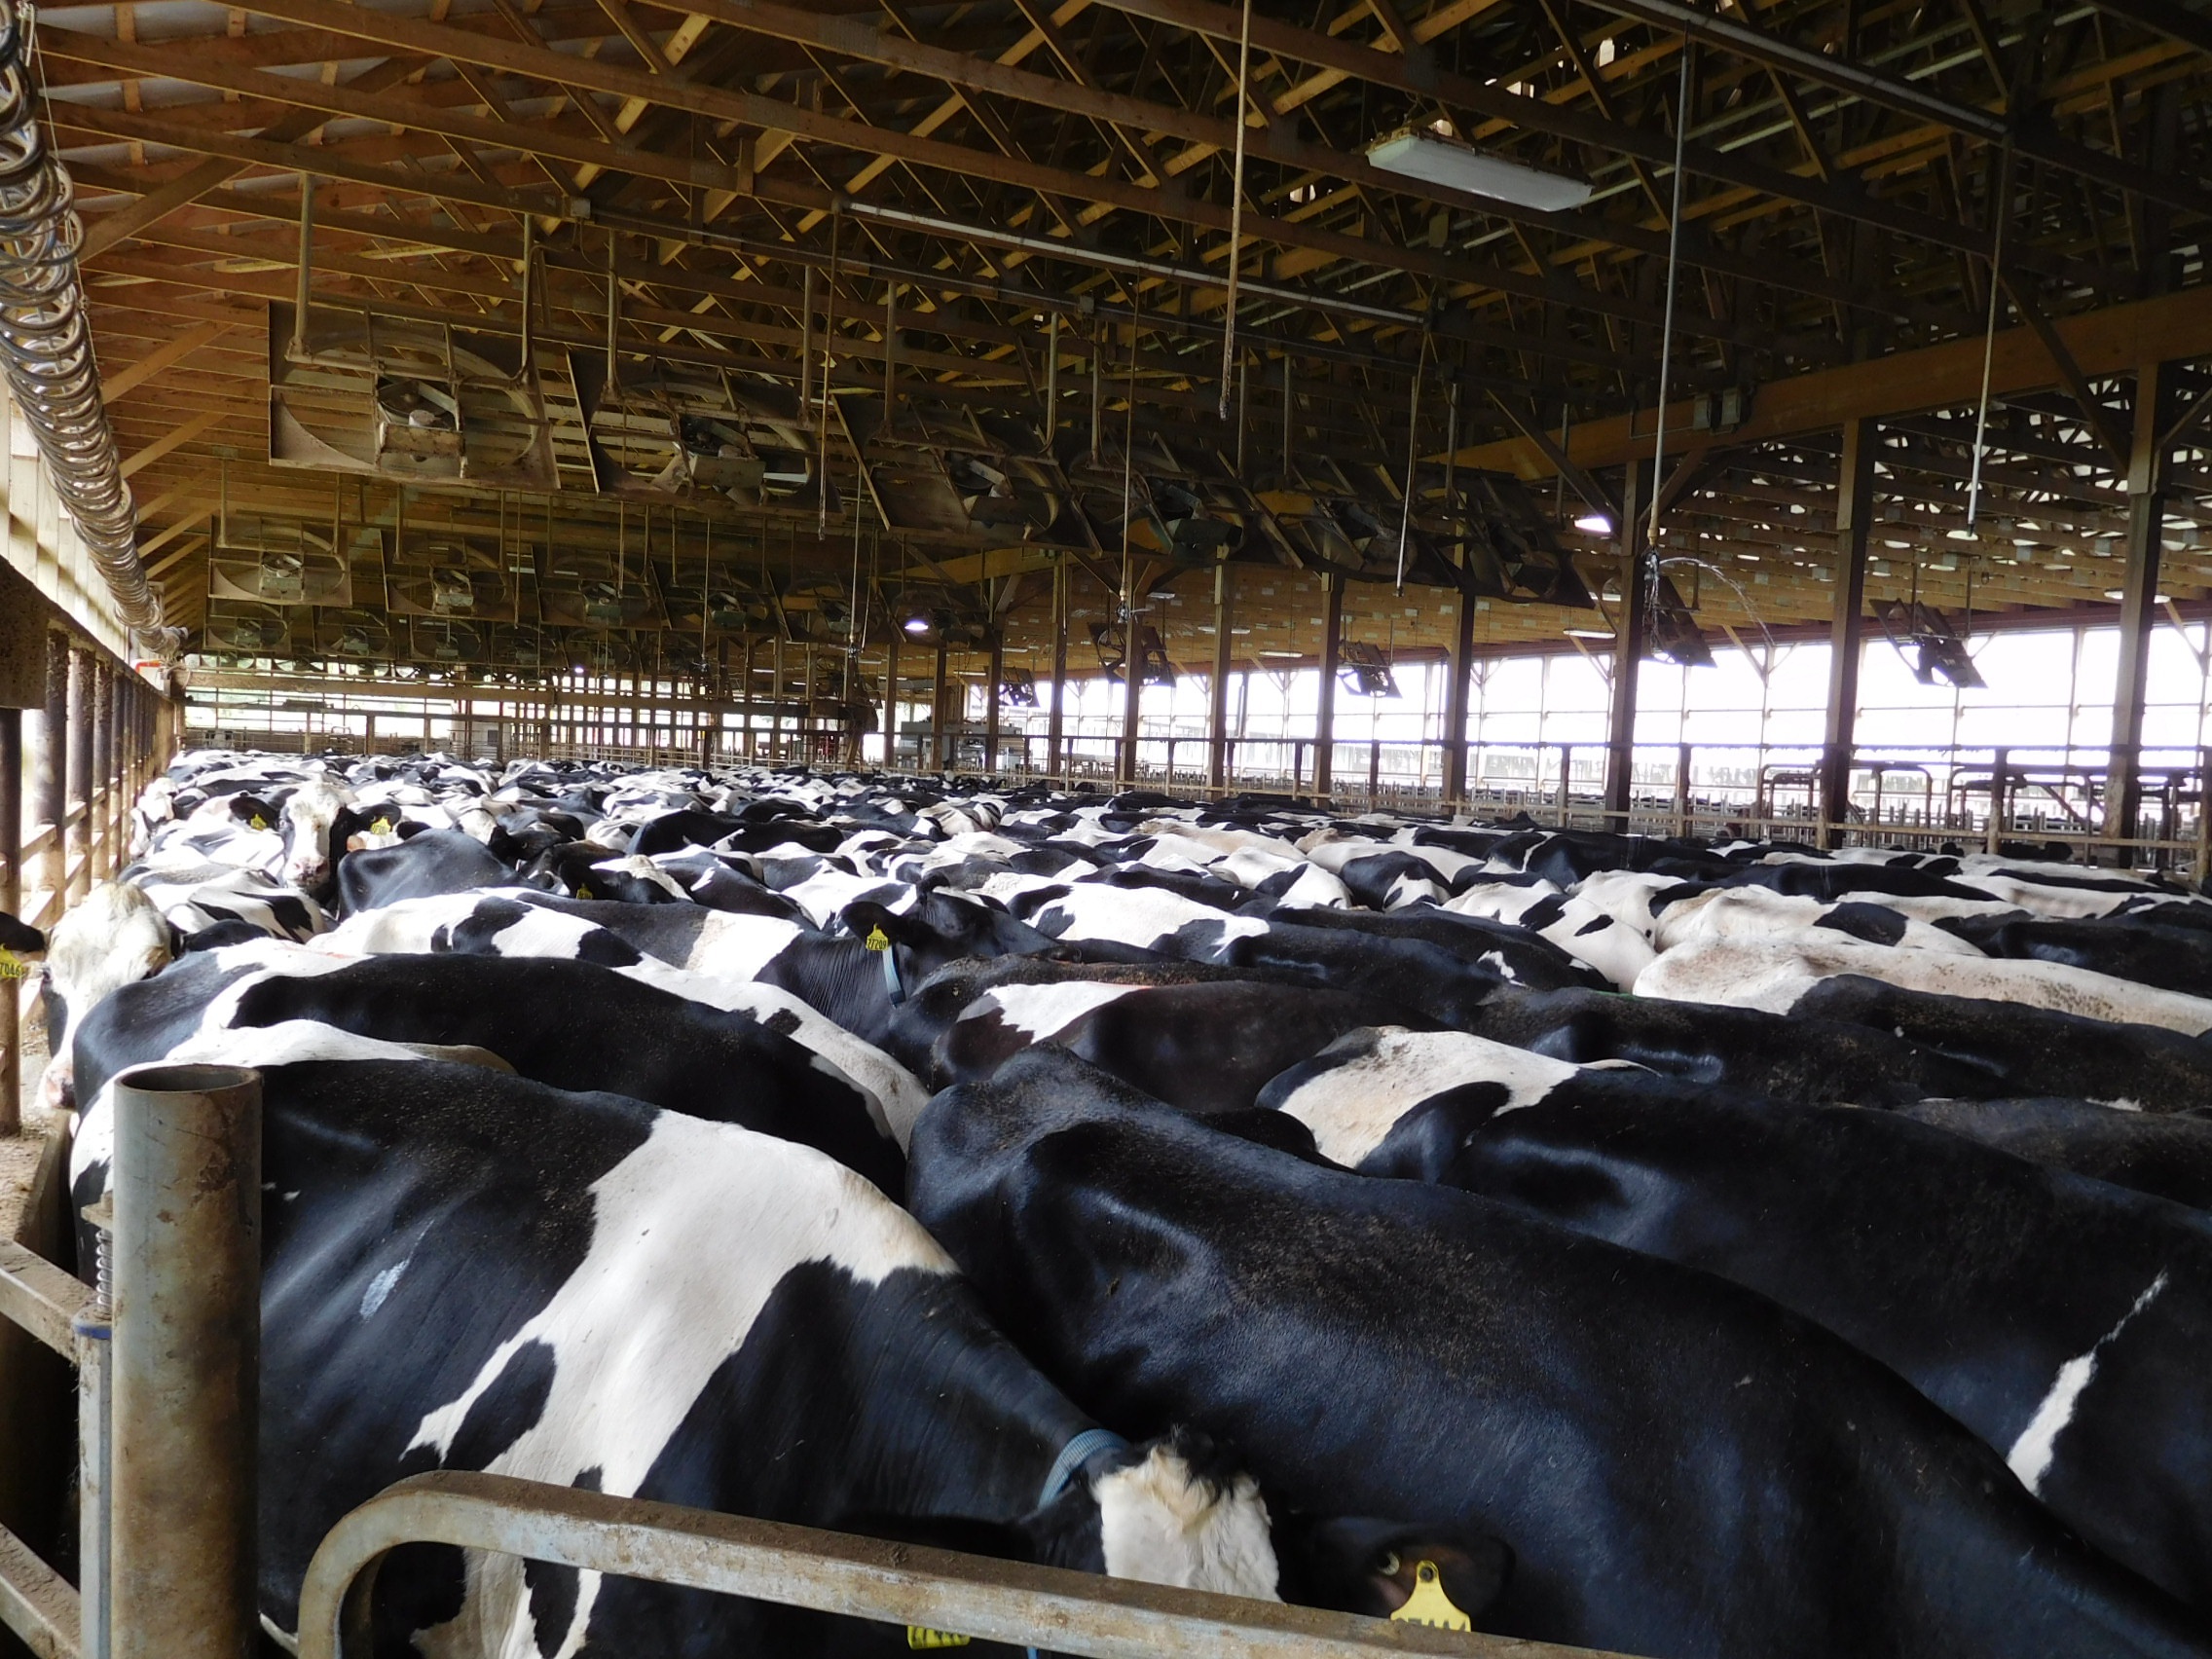 Cows in holding area before they enter the milking parlor